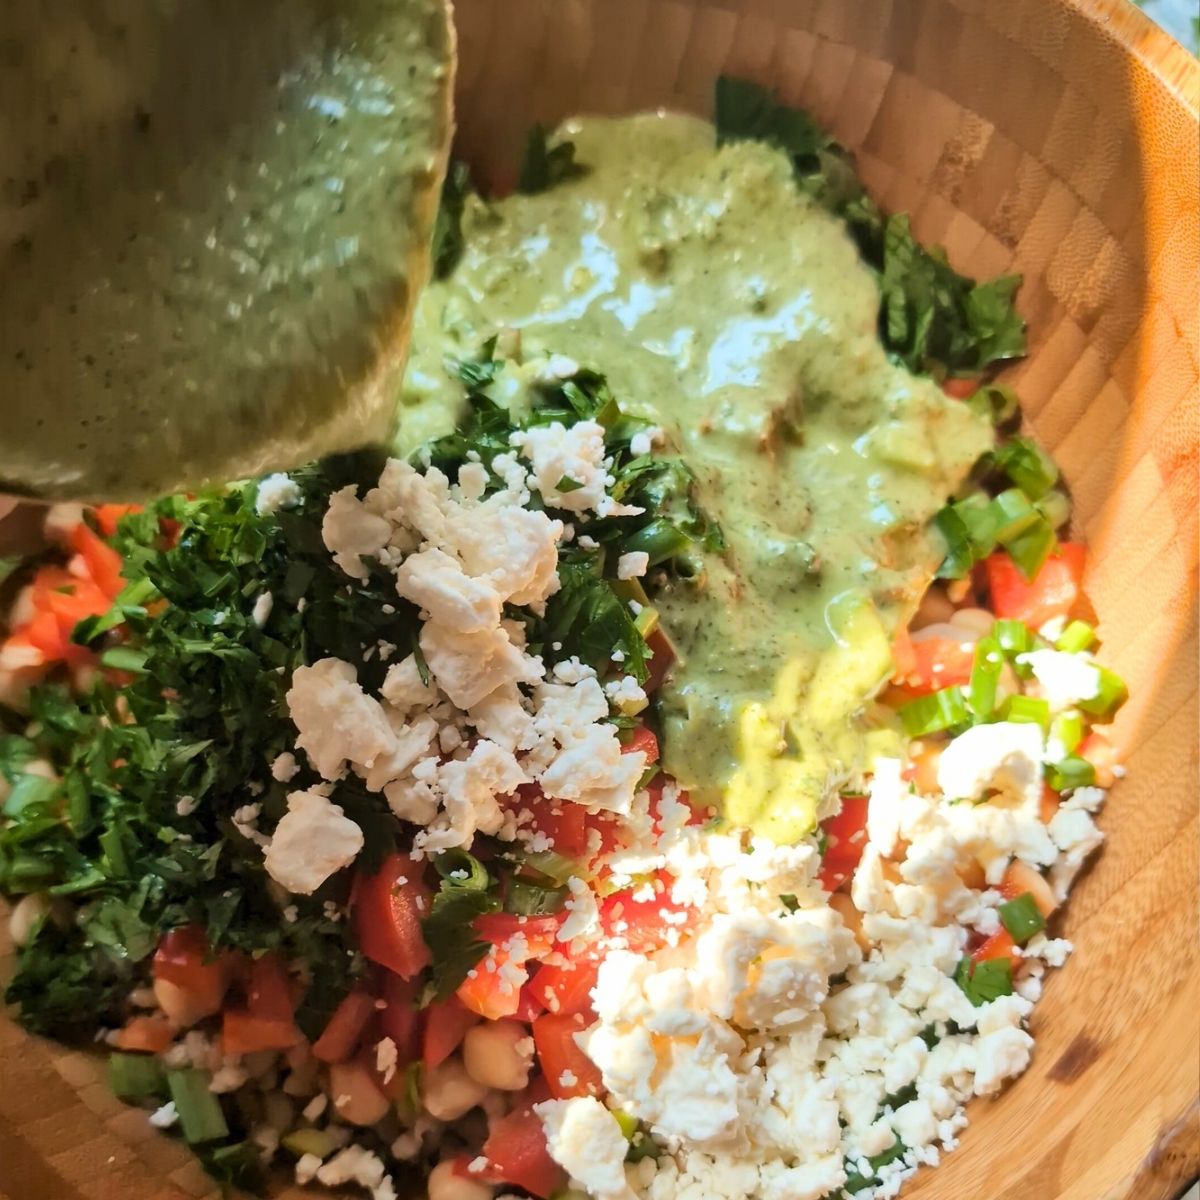 a hand pouring green pesto dressing over the bean and barley salad in a large serving bowl.